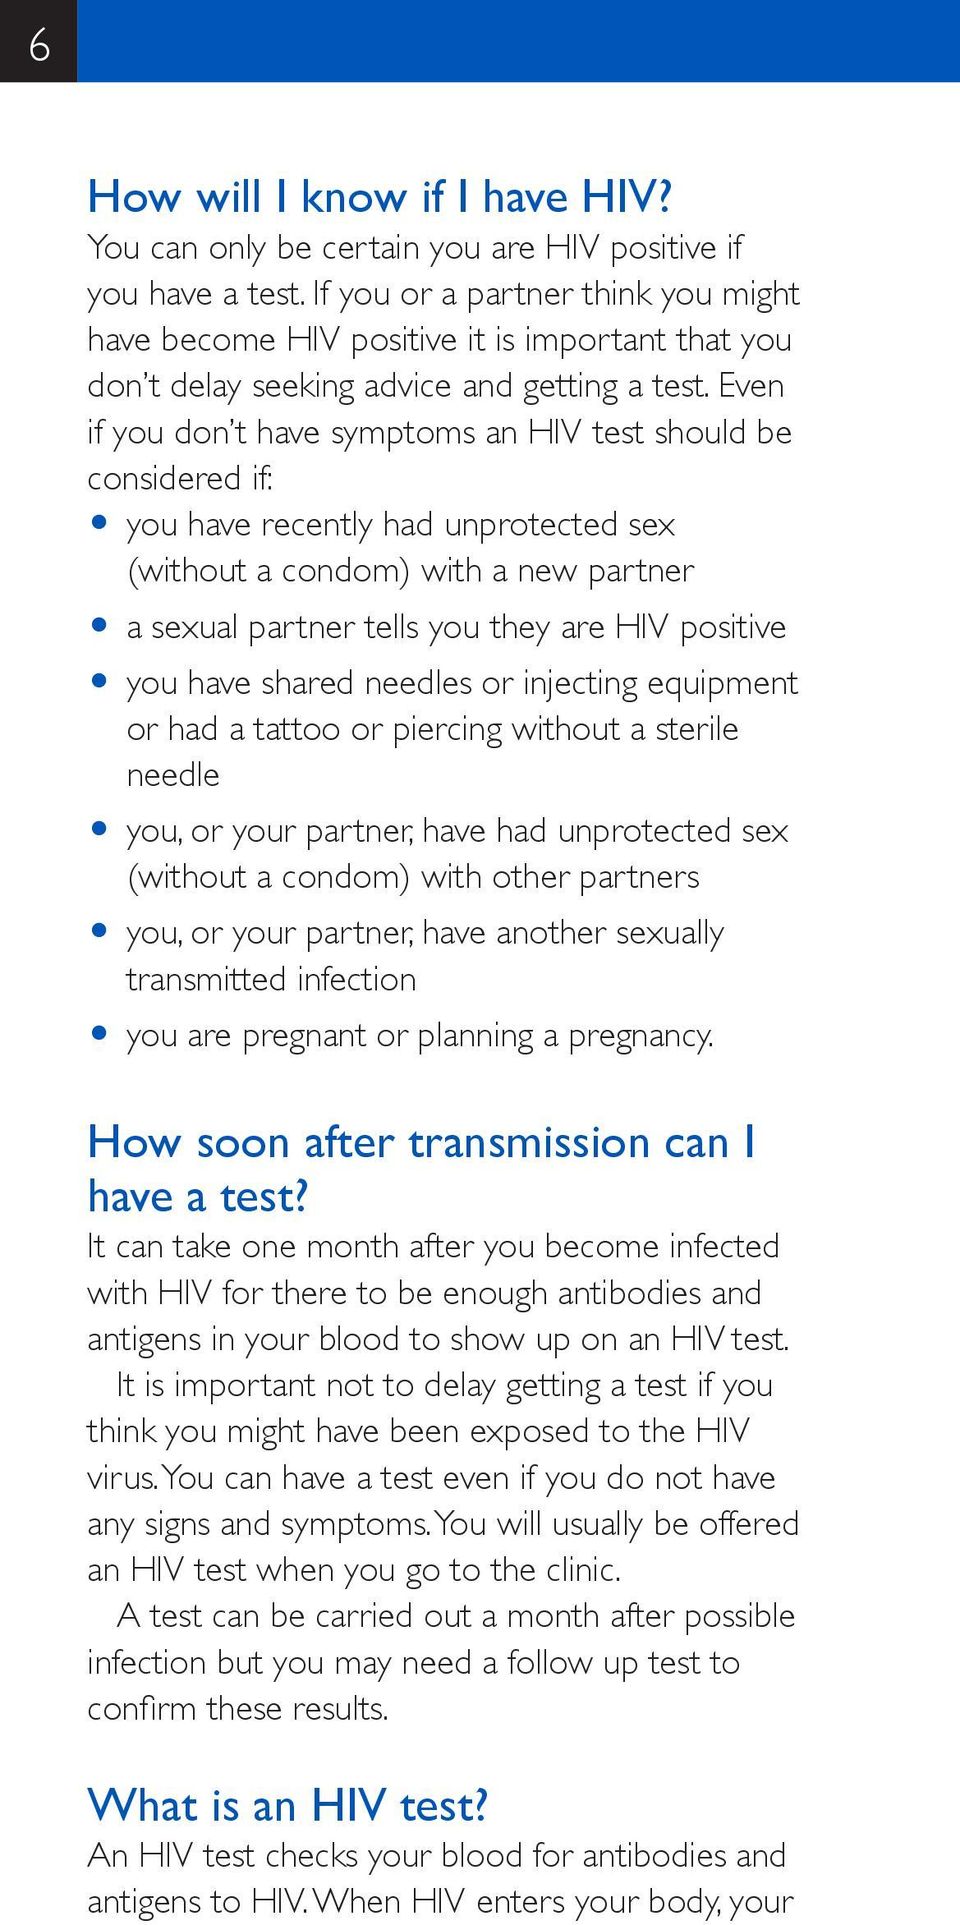 Even if you don t have symptoms an HIV test should be considered if: O you have recently had unprotected sex (without a condom) with a new partner O a sexual partner tells you they are HIV positive O